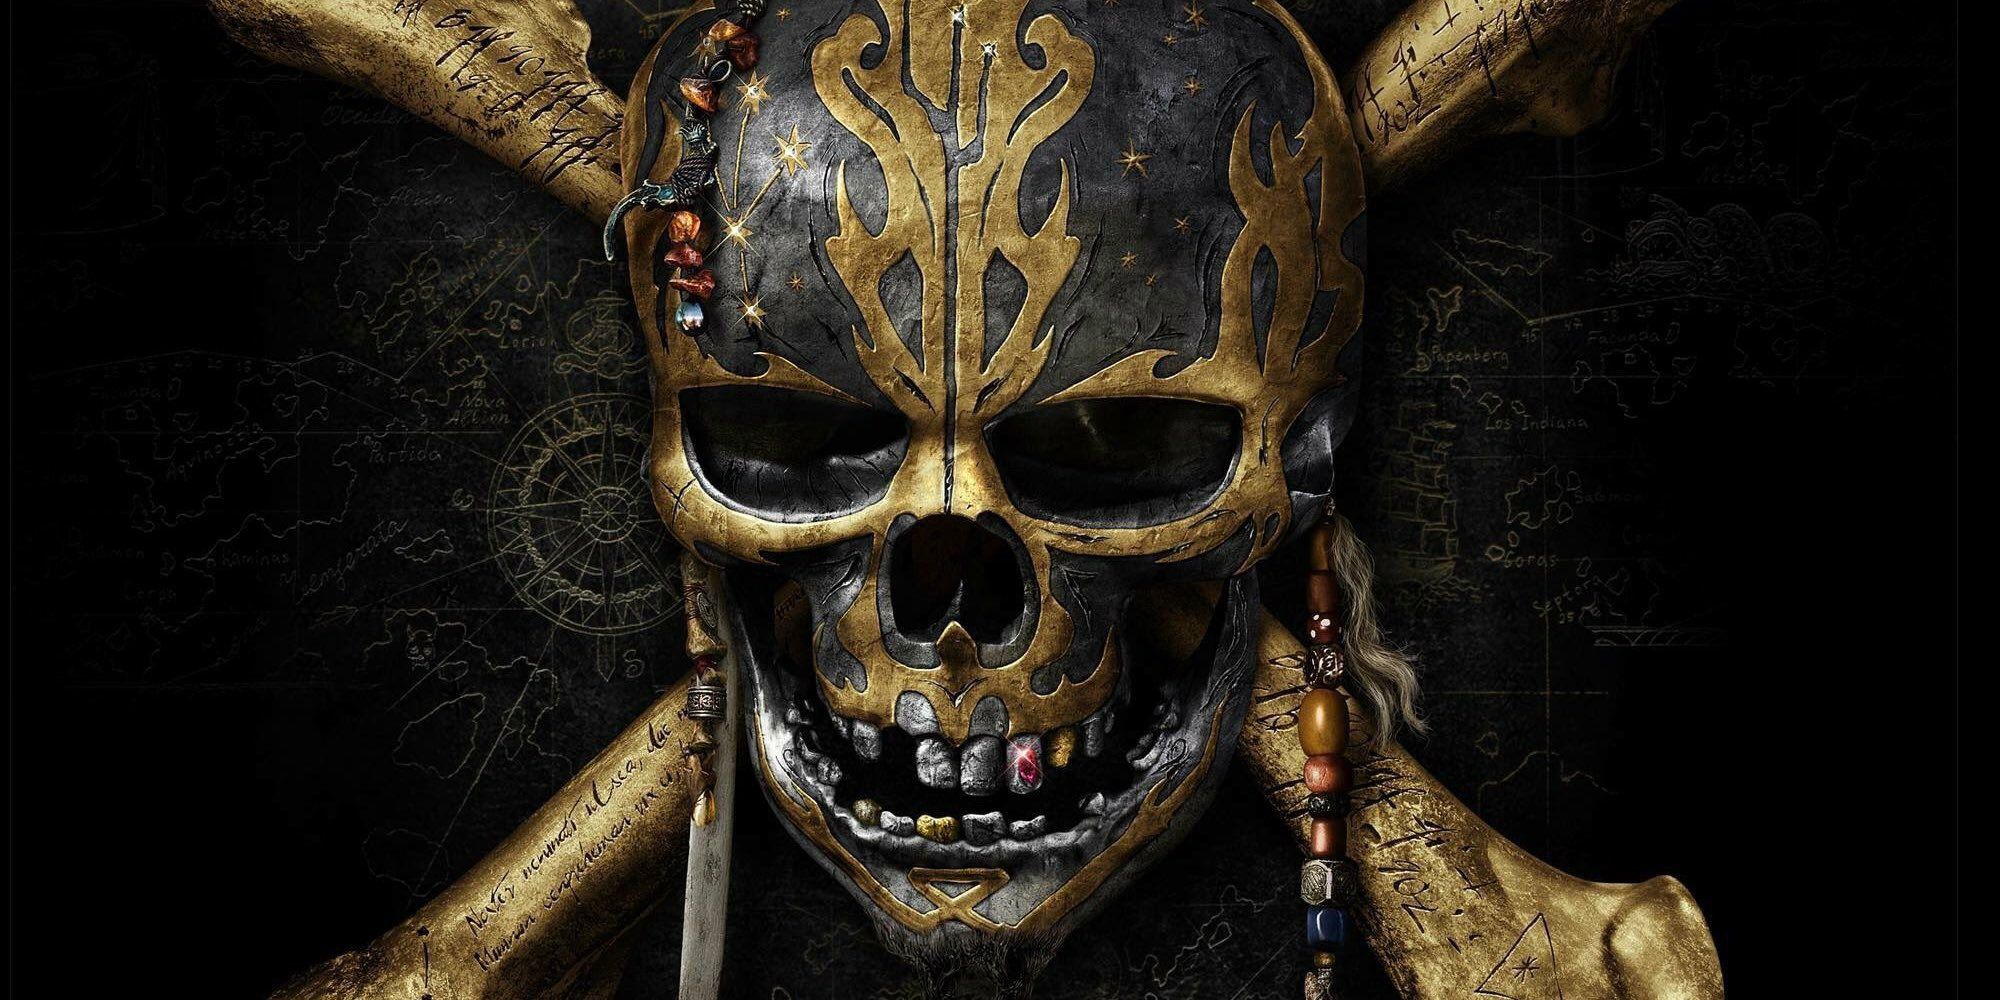 Pirates of the Caribbean 5’s Extended Super Bowl Trailer